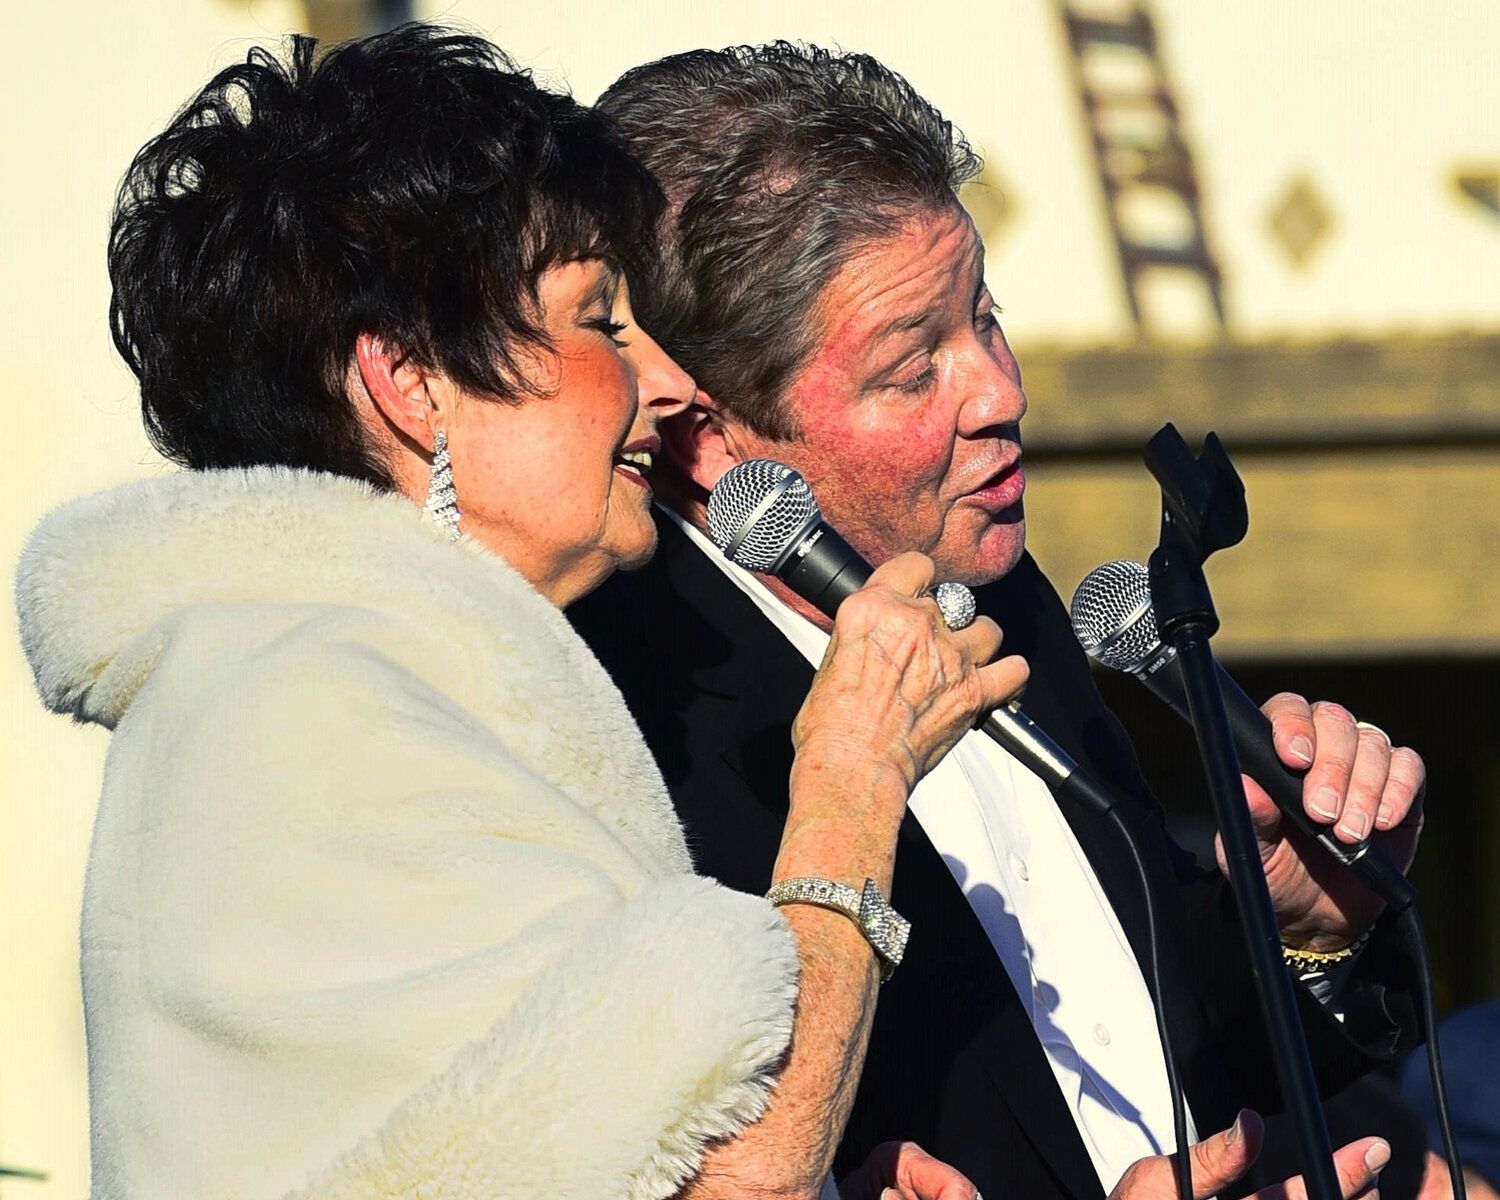 Vocalists Cheri Seith and Vito Maynes will join the AZ Swing Kings at their upcoming show Dec. 14 in Peoria.